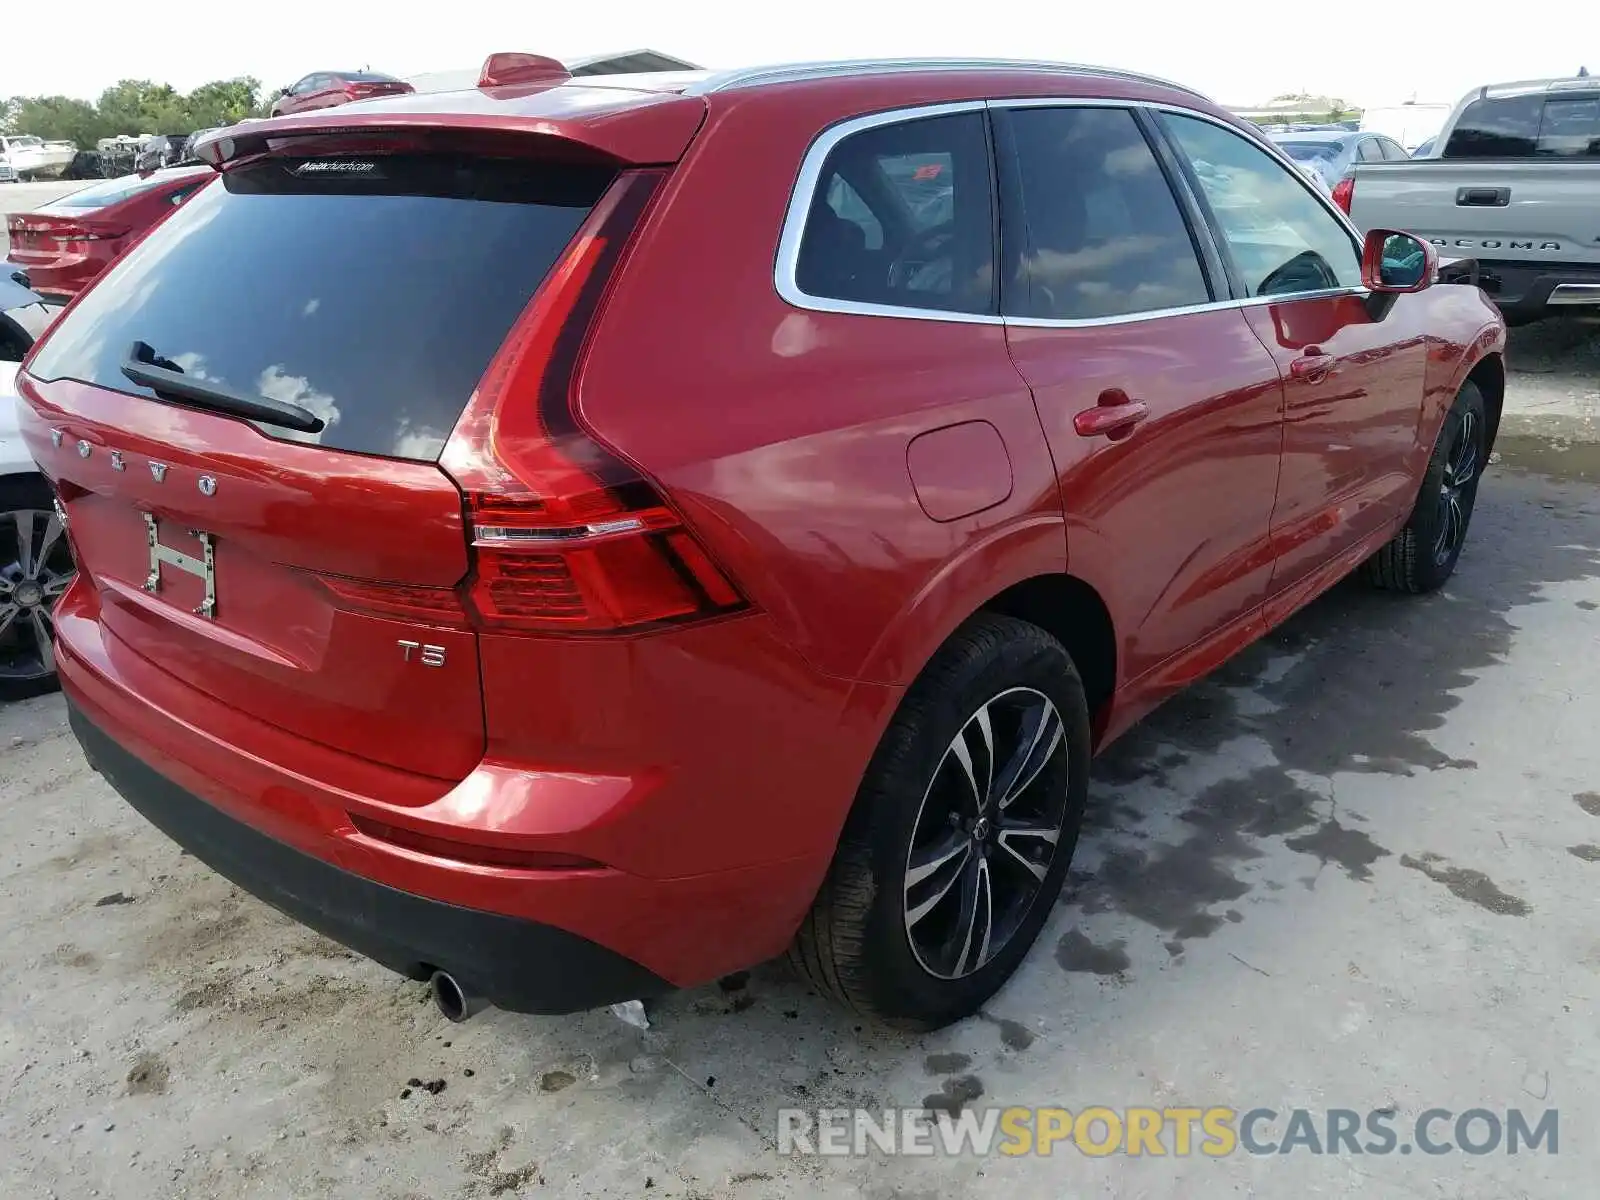 4 Photograph of a damaged car LYV102DK0KB315687 VOLVO XC60 T5 MO 2019